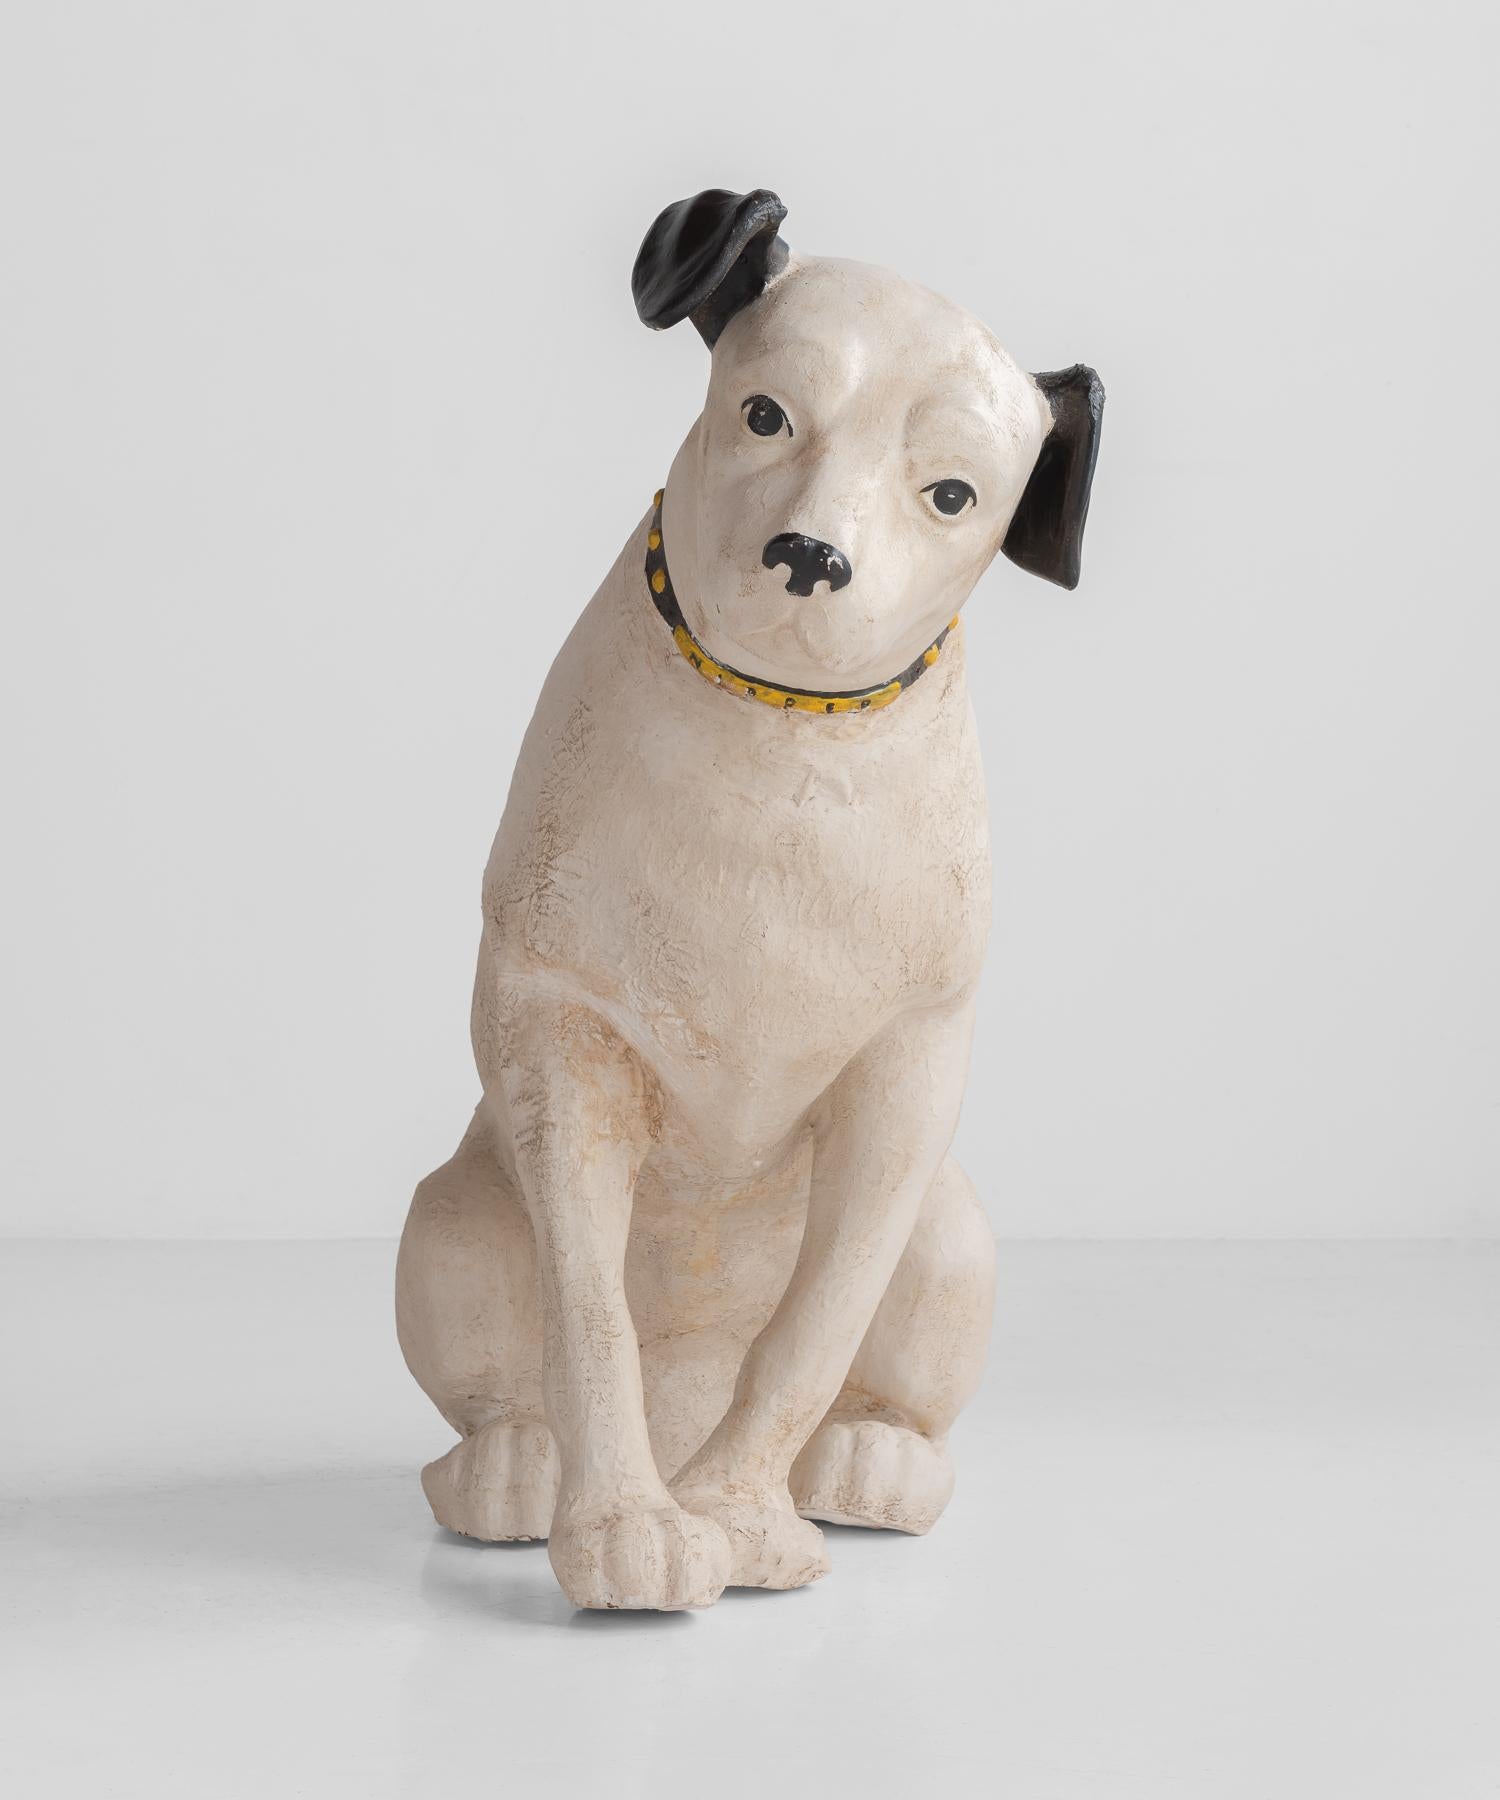 Papier mâché RCA victory nipper dog, circa 1920.

Folk art sculpture of a dog used for display. Papier mâché with delicately crafted features and original paint.